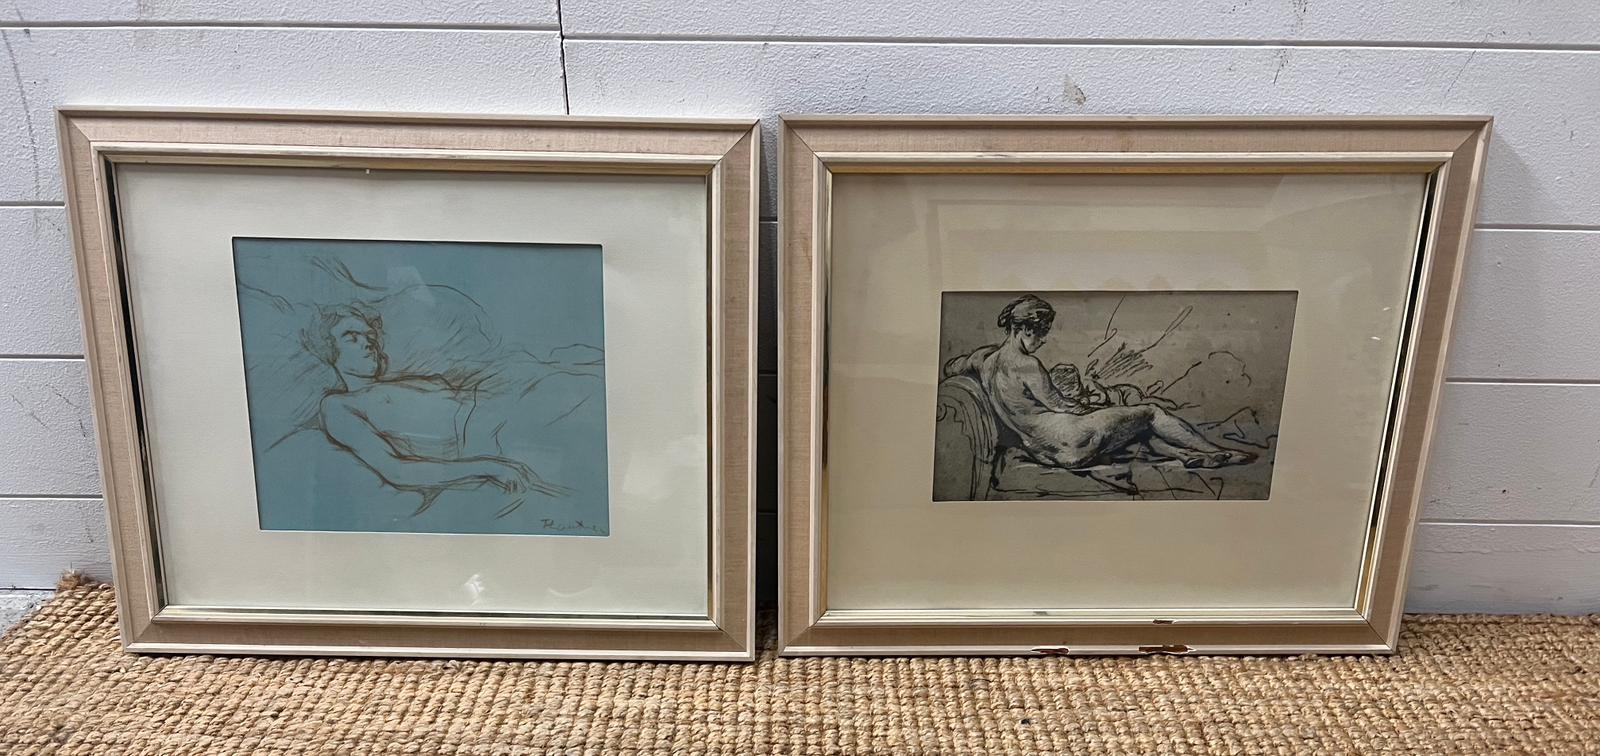 Two prints of life drawing sketches